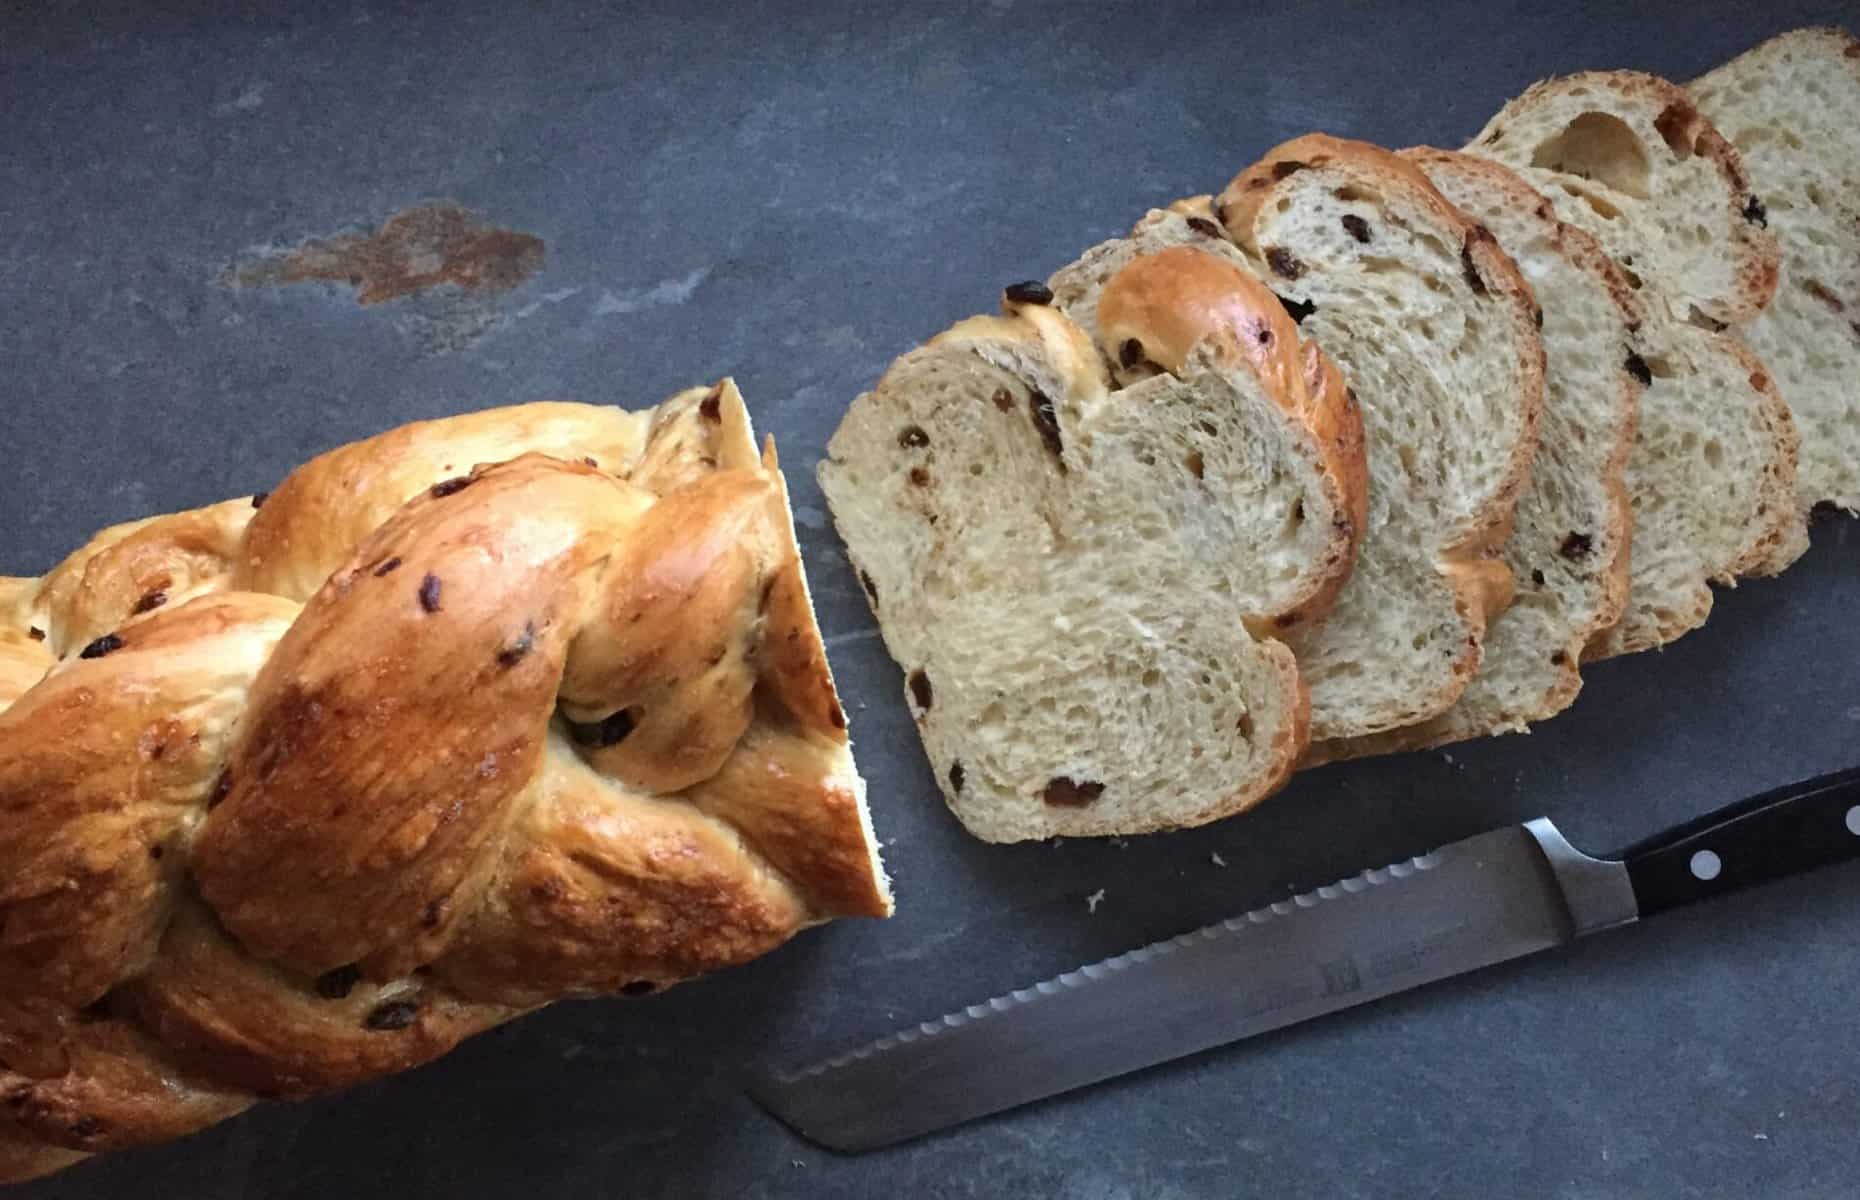 a 5 braid raisin challah with four slices and bread knife.